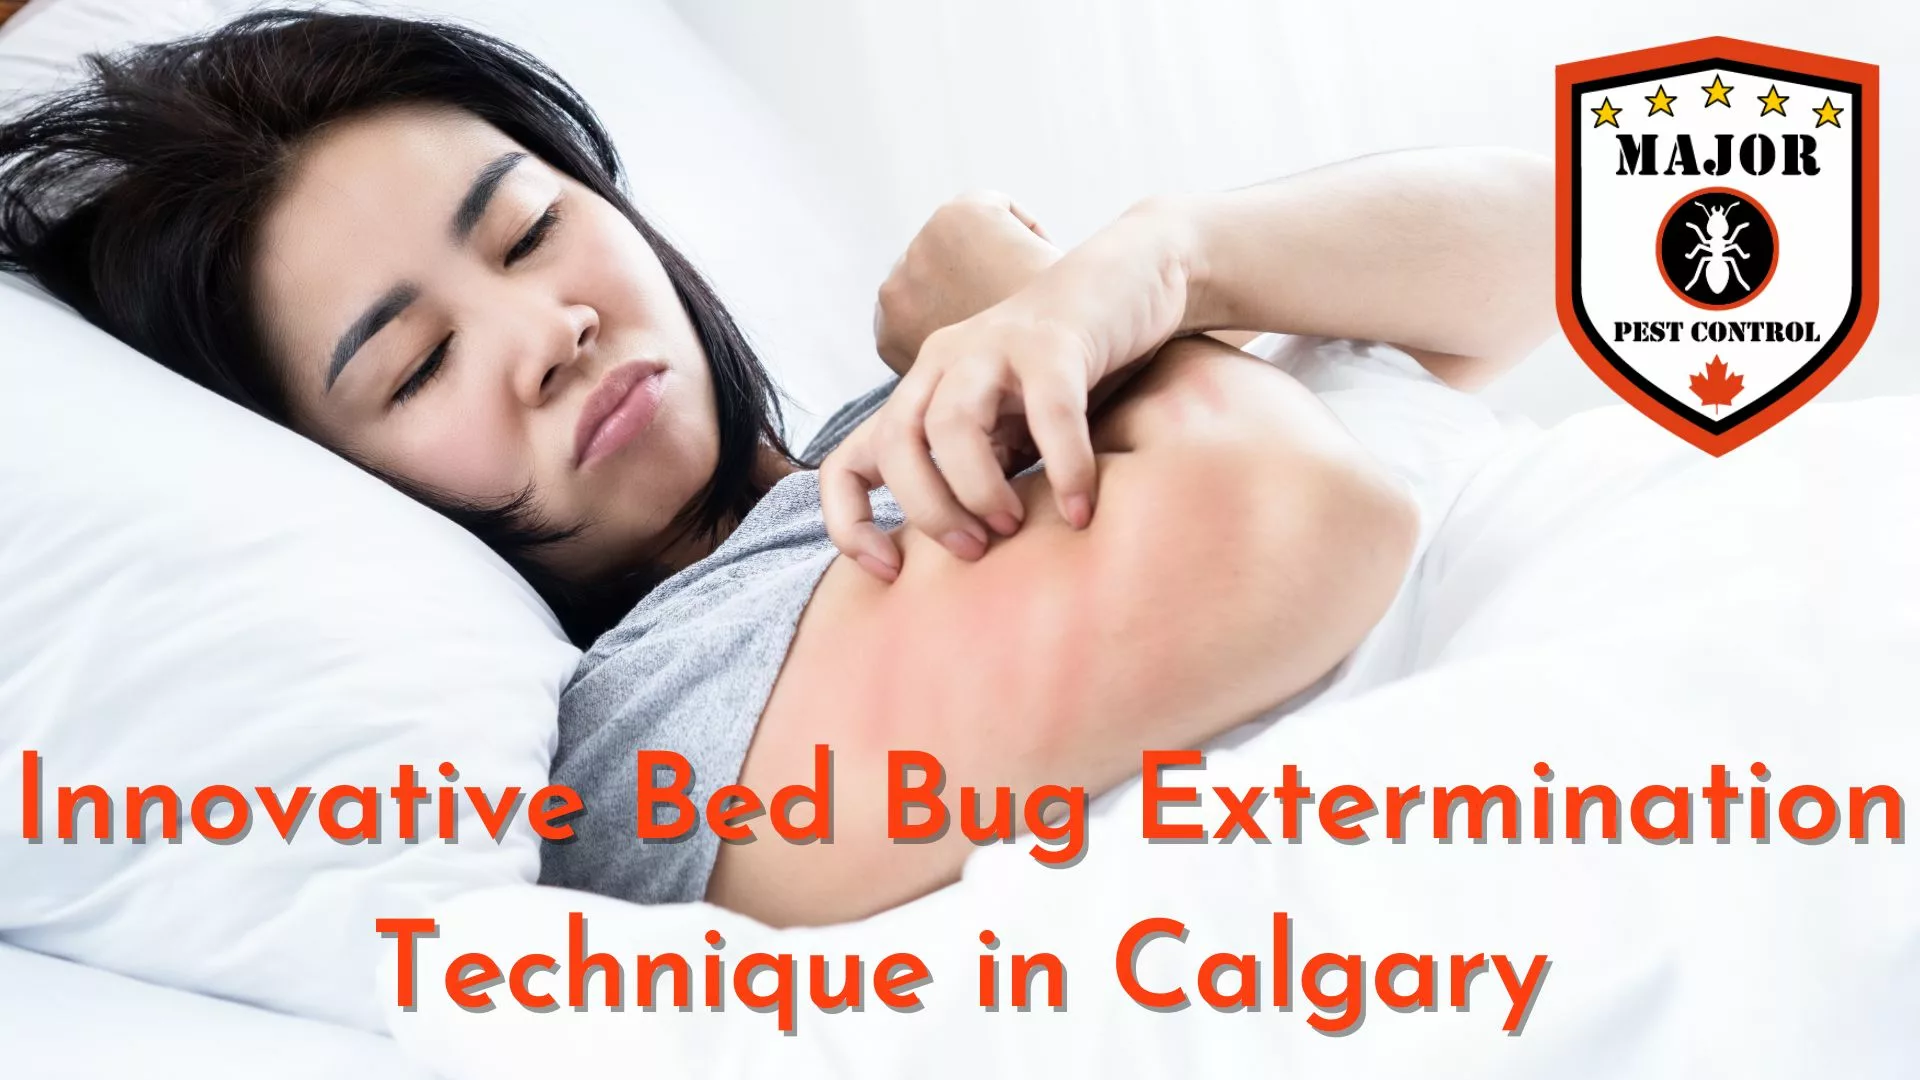 Innovative Bed Bug Extermination Technique in Calgary